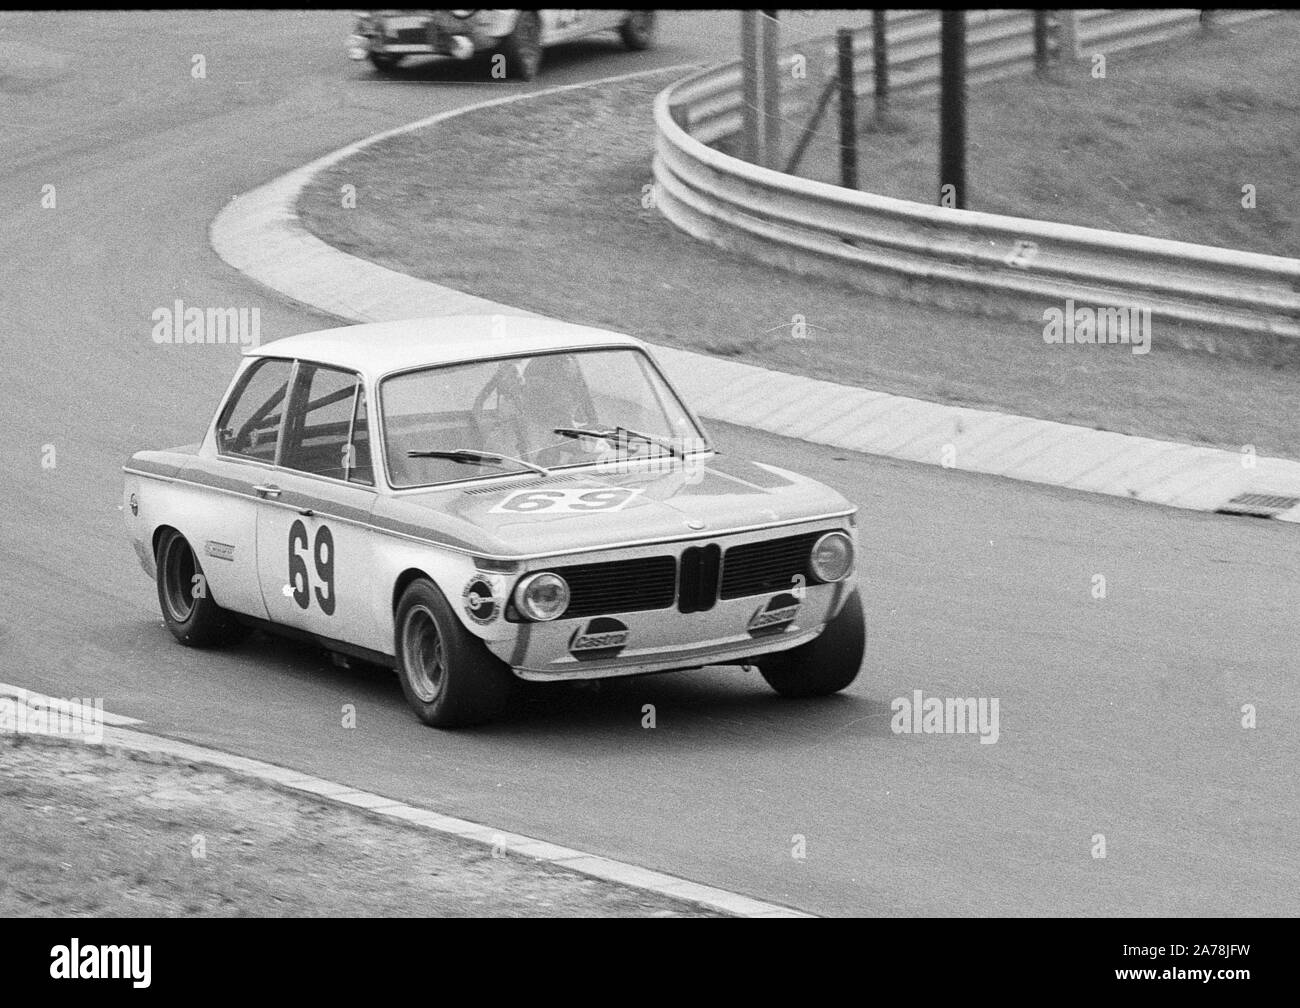 BMW 2002 during a 1970s Touring Car Race at the Nuerburgring, Germany ...